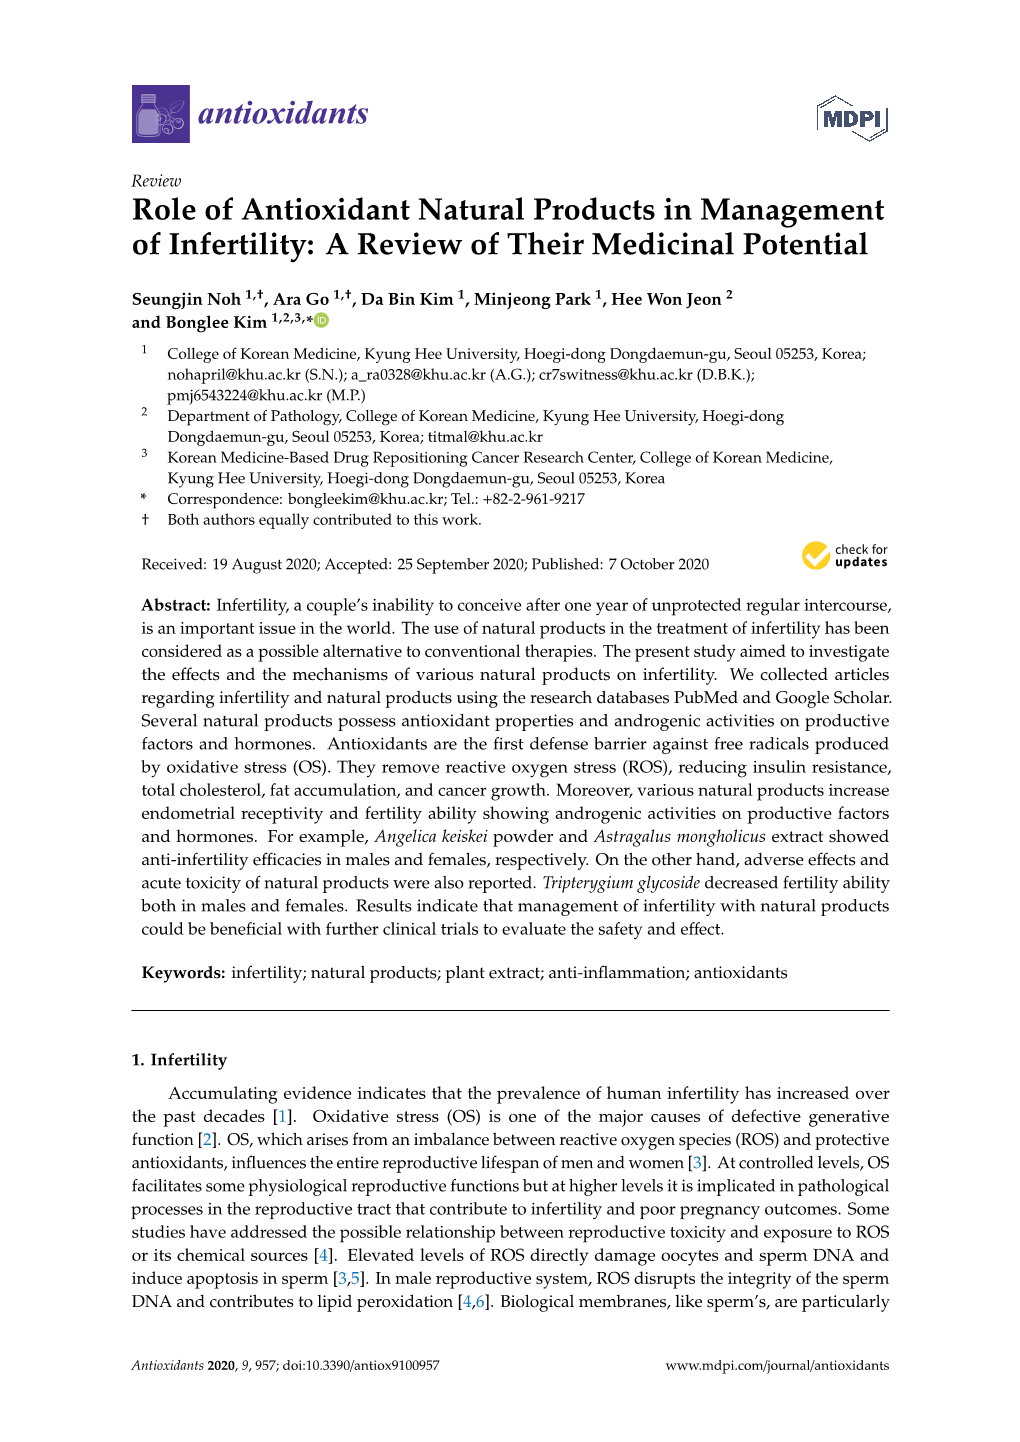 Role of Antioxidant Natural Products in Management of Infertility: a Review of Their Medicinal Potential